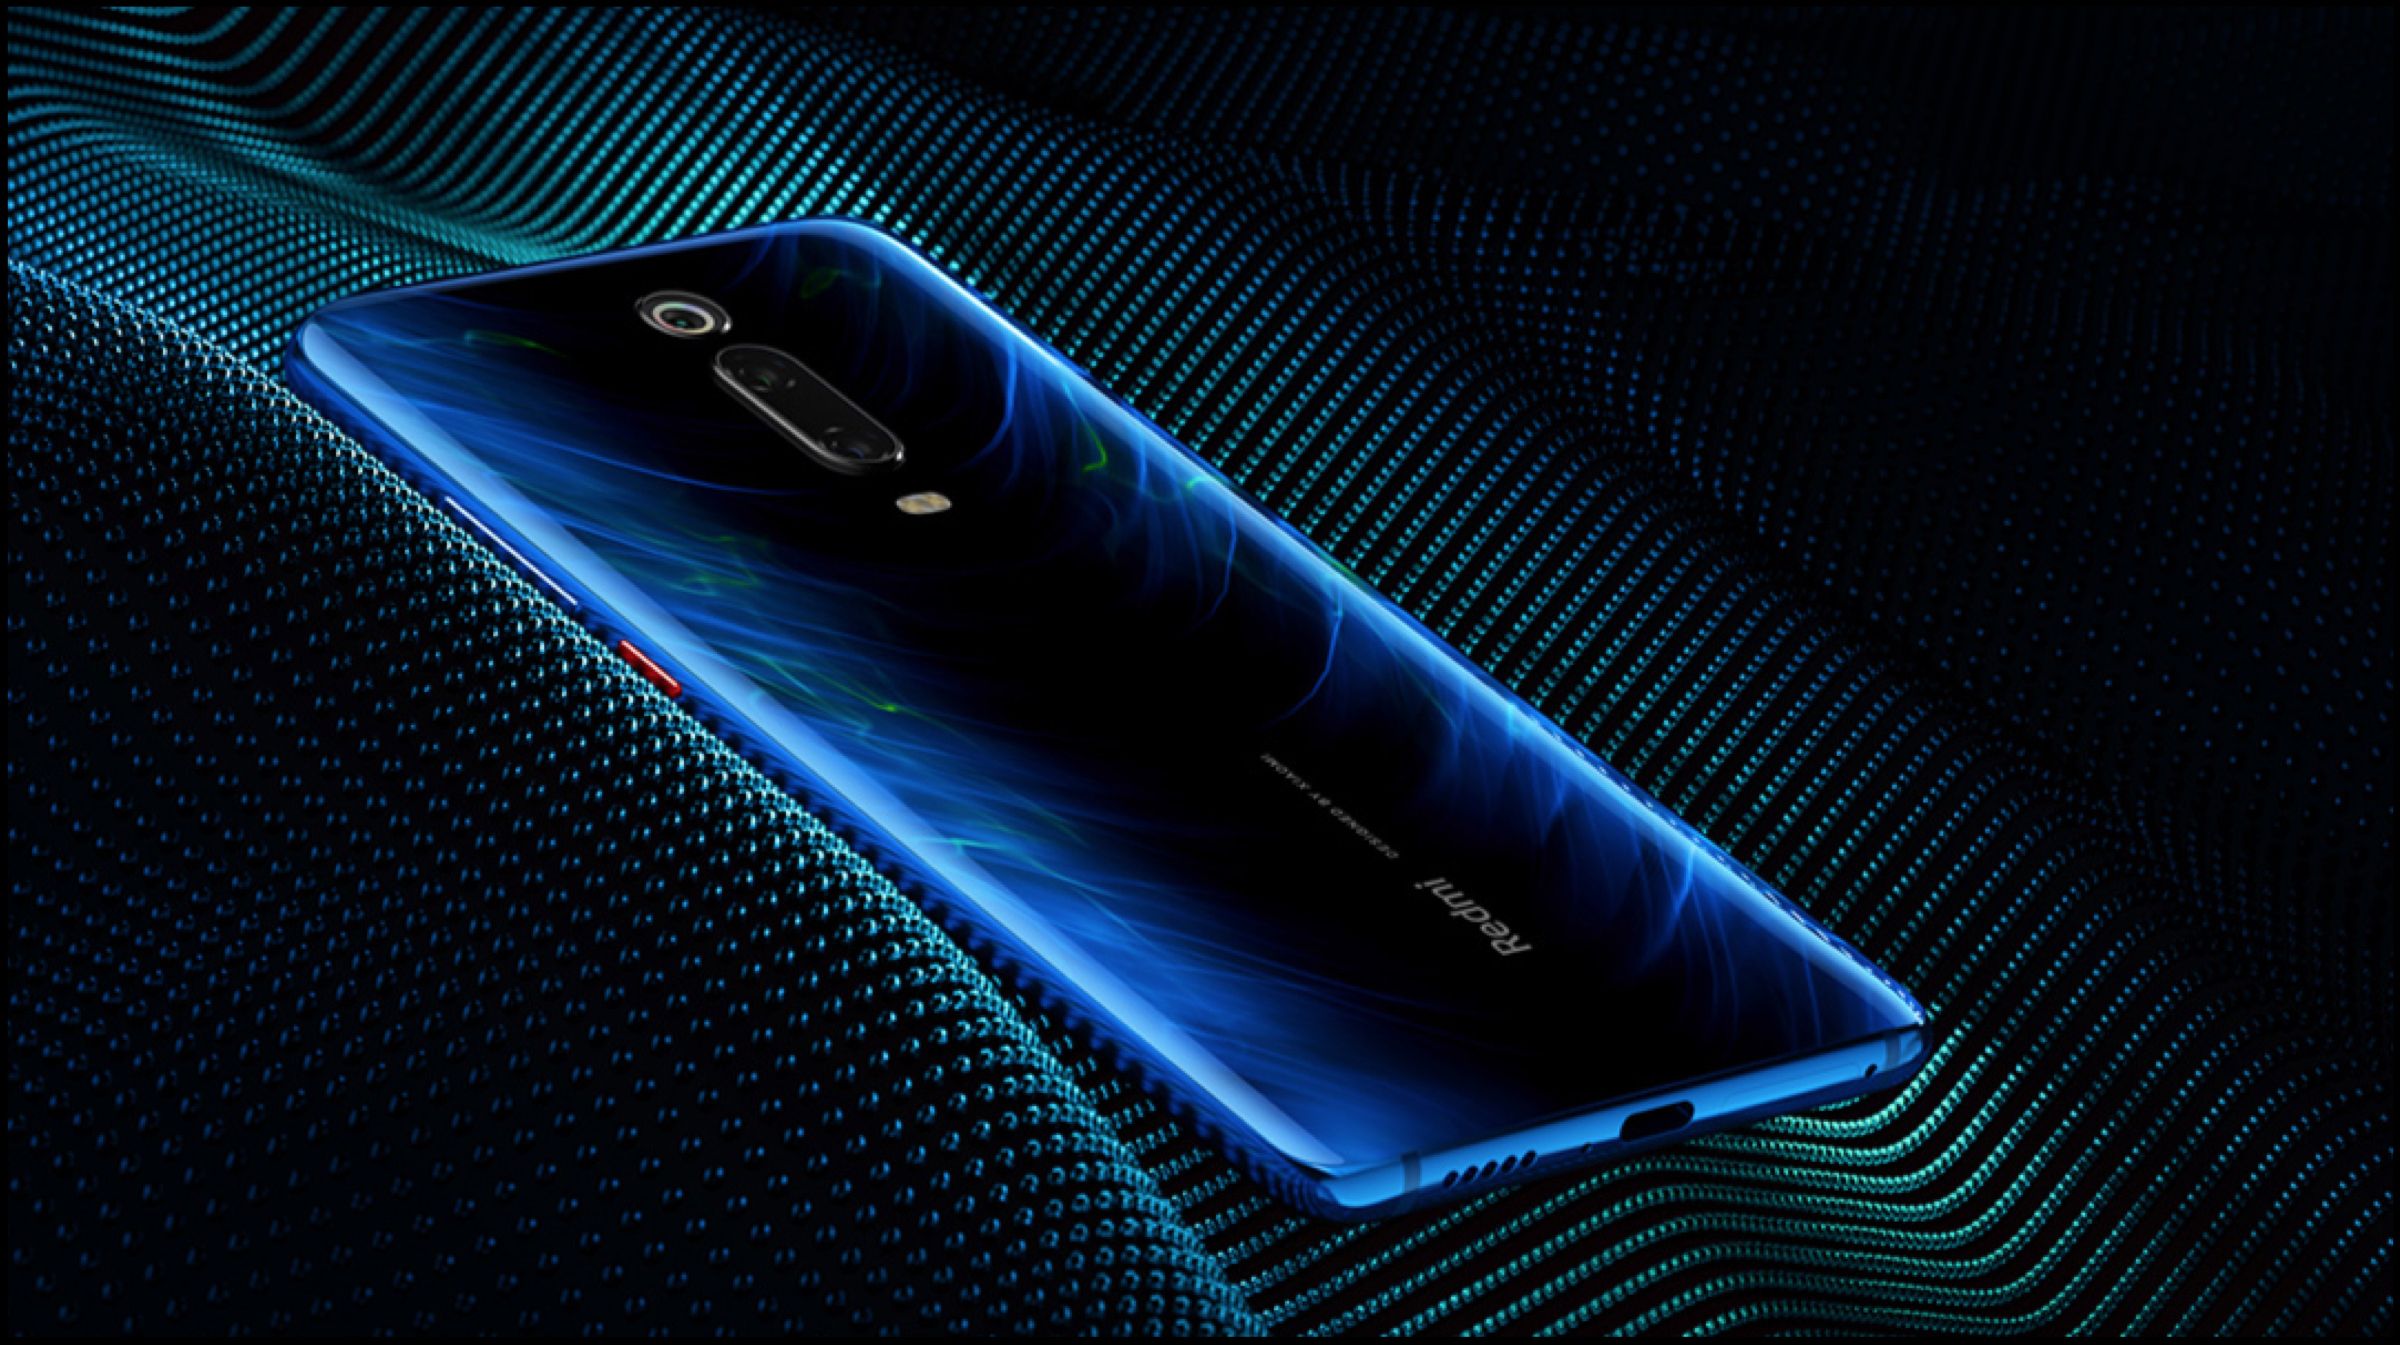 Redmi K20, K20 Pro Launched In China, Price & Specs ...